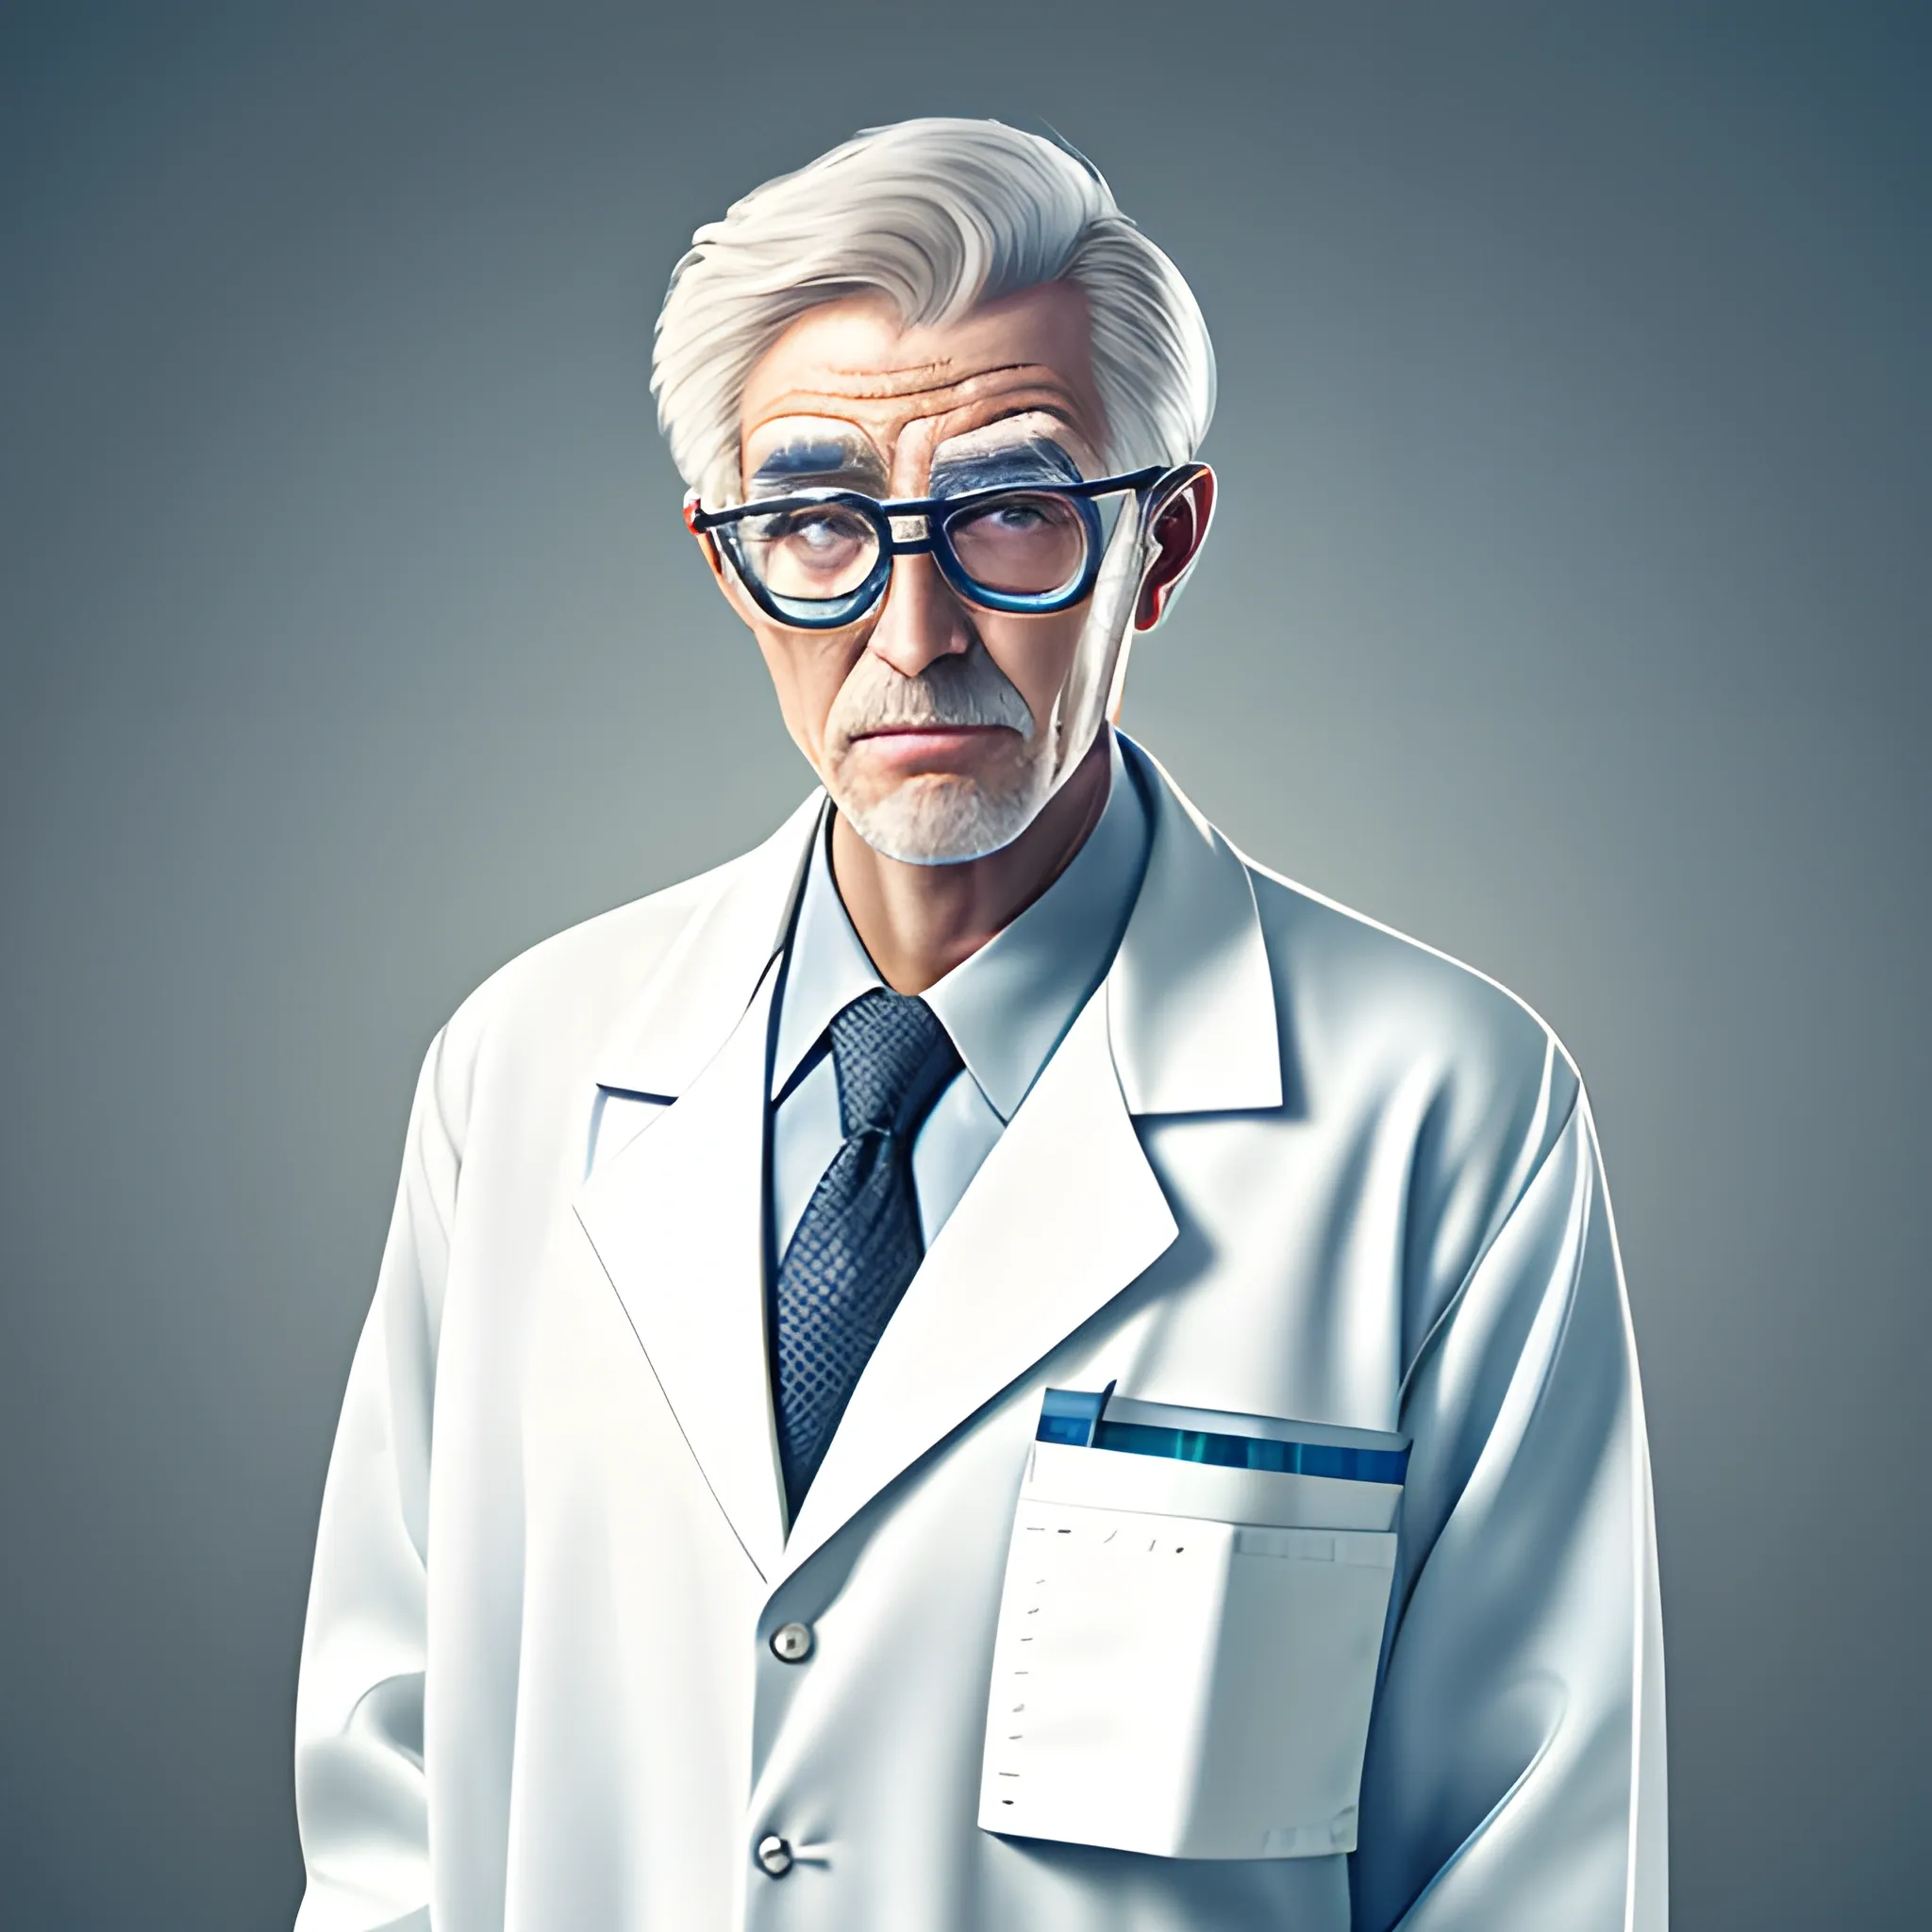 older man in futuristic labcoat and spectacles - Arthub.ai